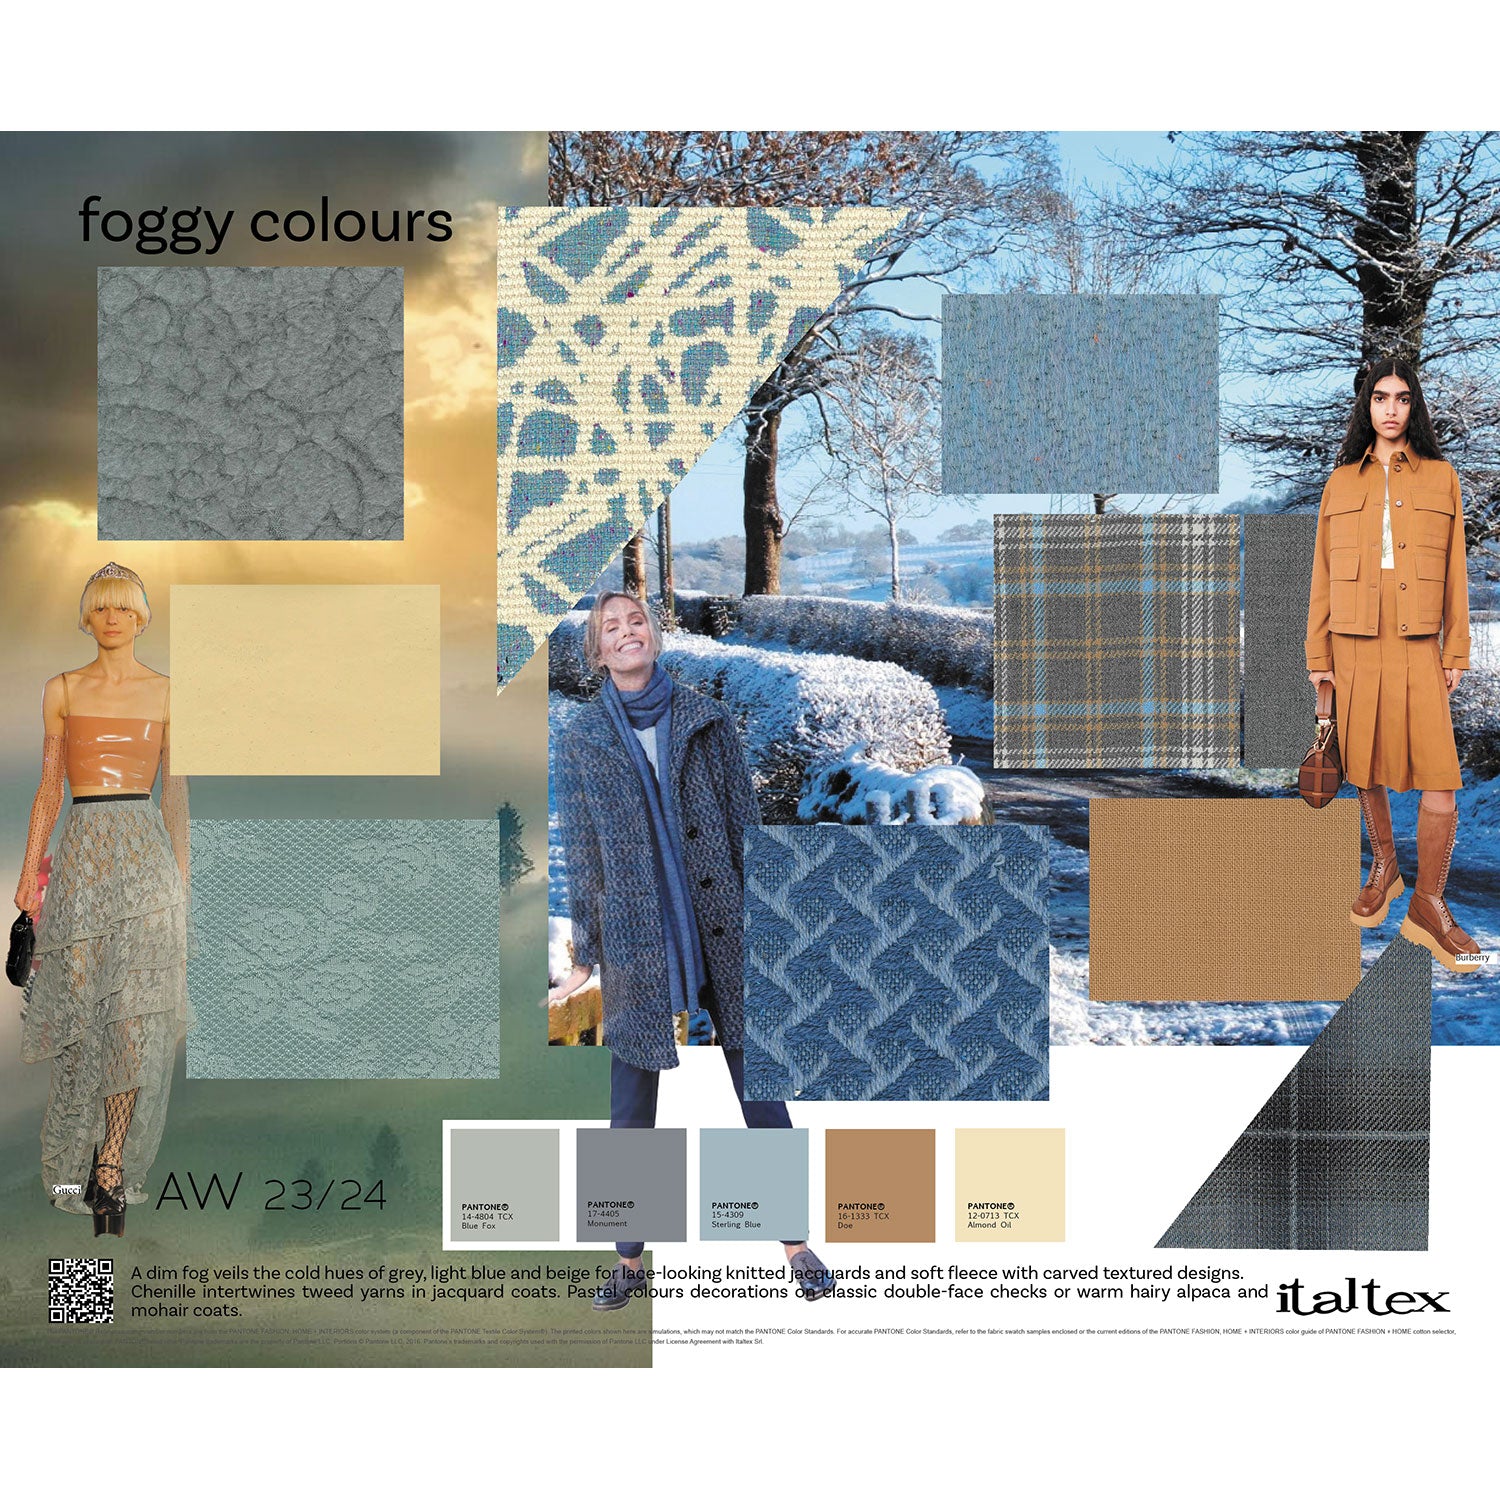 Womenswear Colour and Fabric Trends AW 23/24 – Italtex Trends